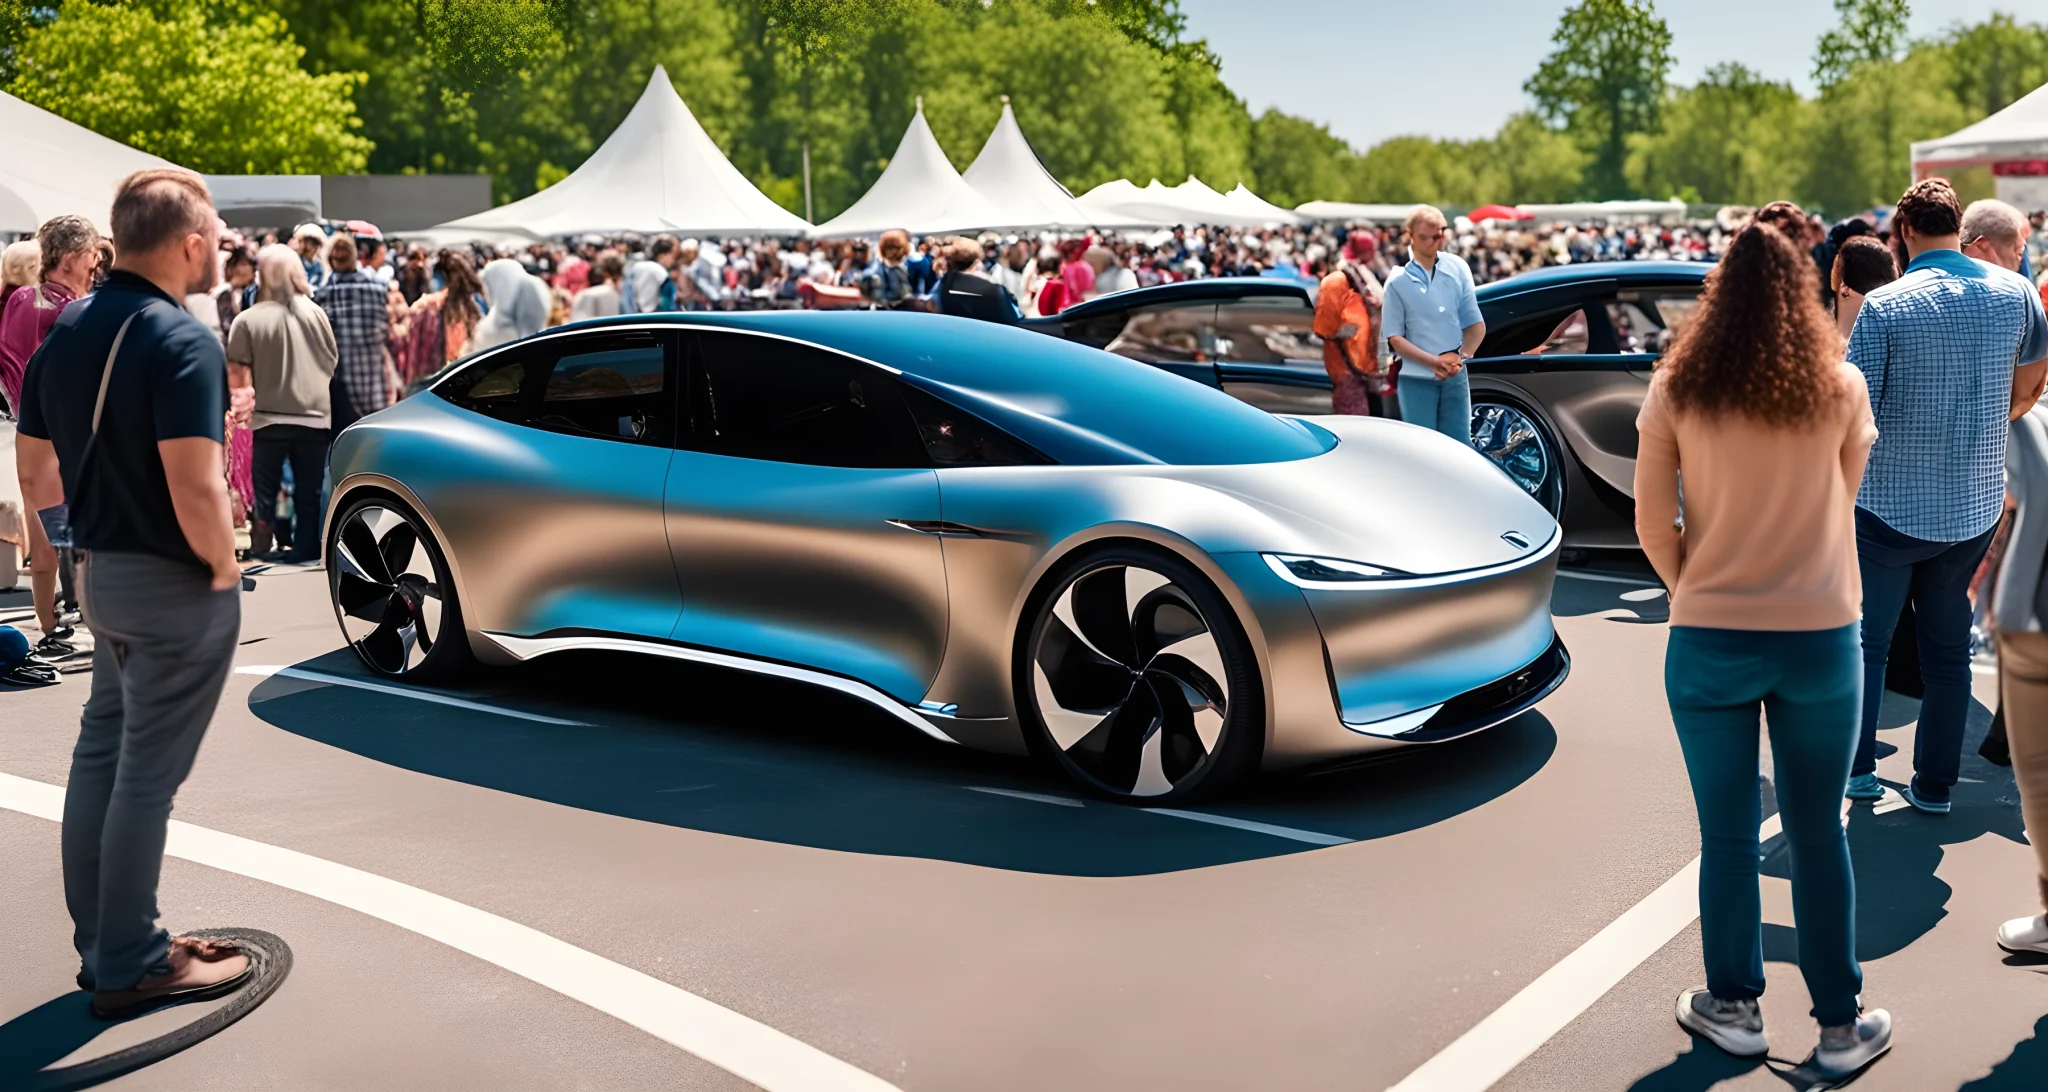 The image shows a sleek electric vehicle parked at an outdoor car show. Several people are gathered around the car, admiring its design and technology.